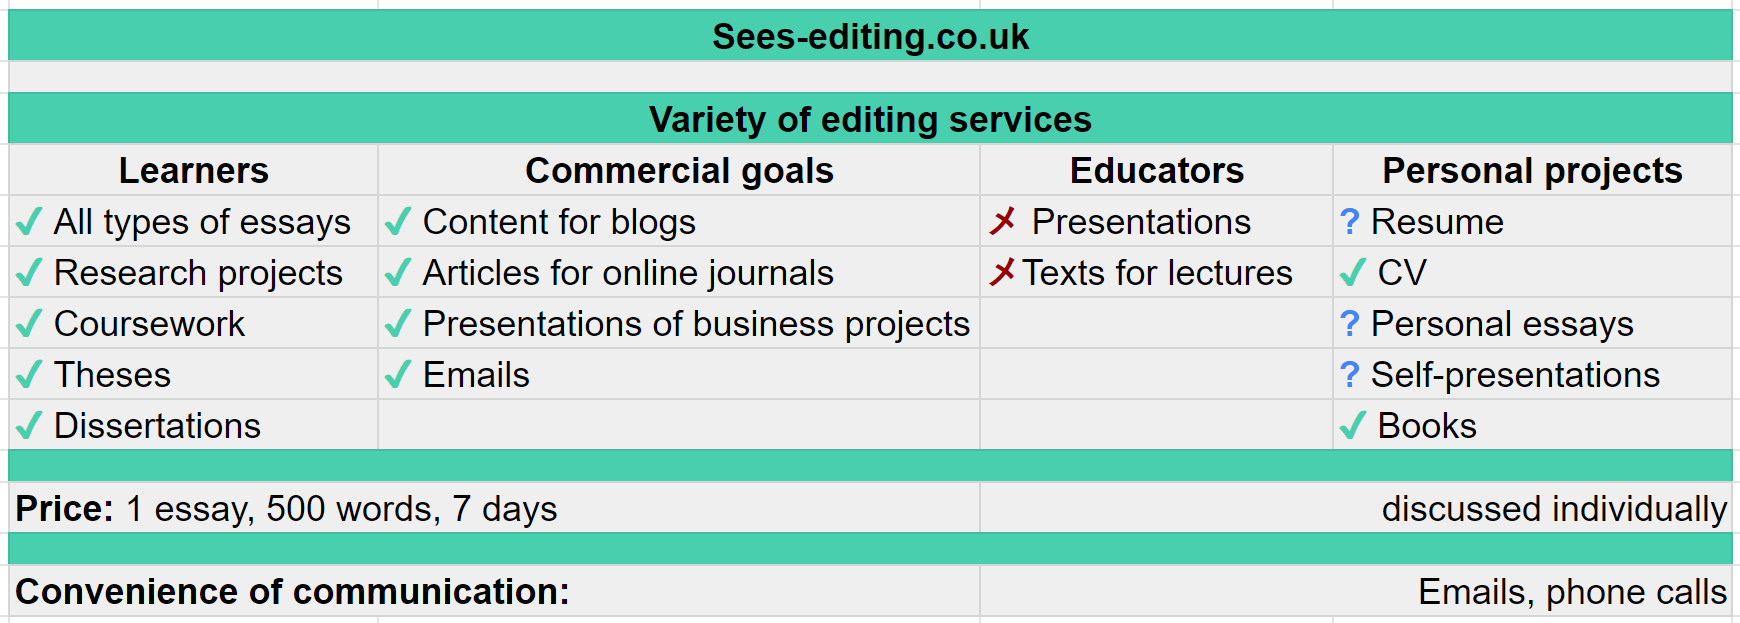 Sees-editing.co.uk